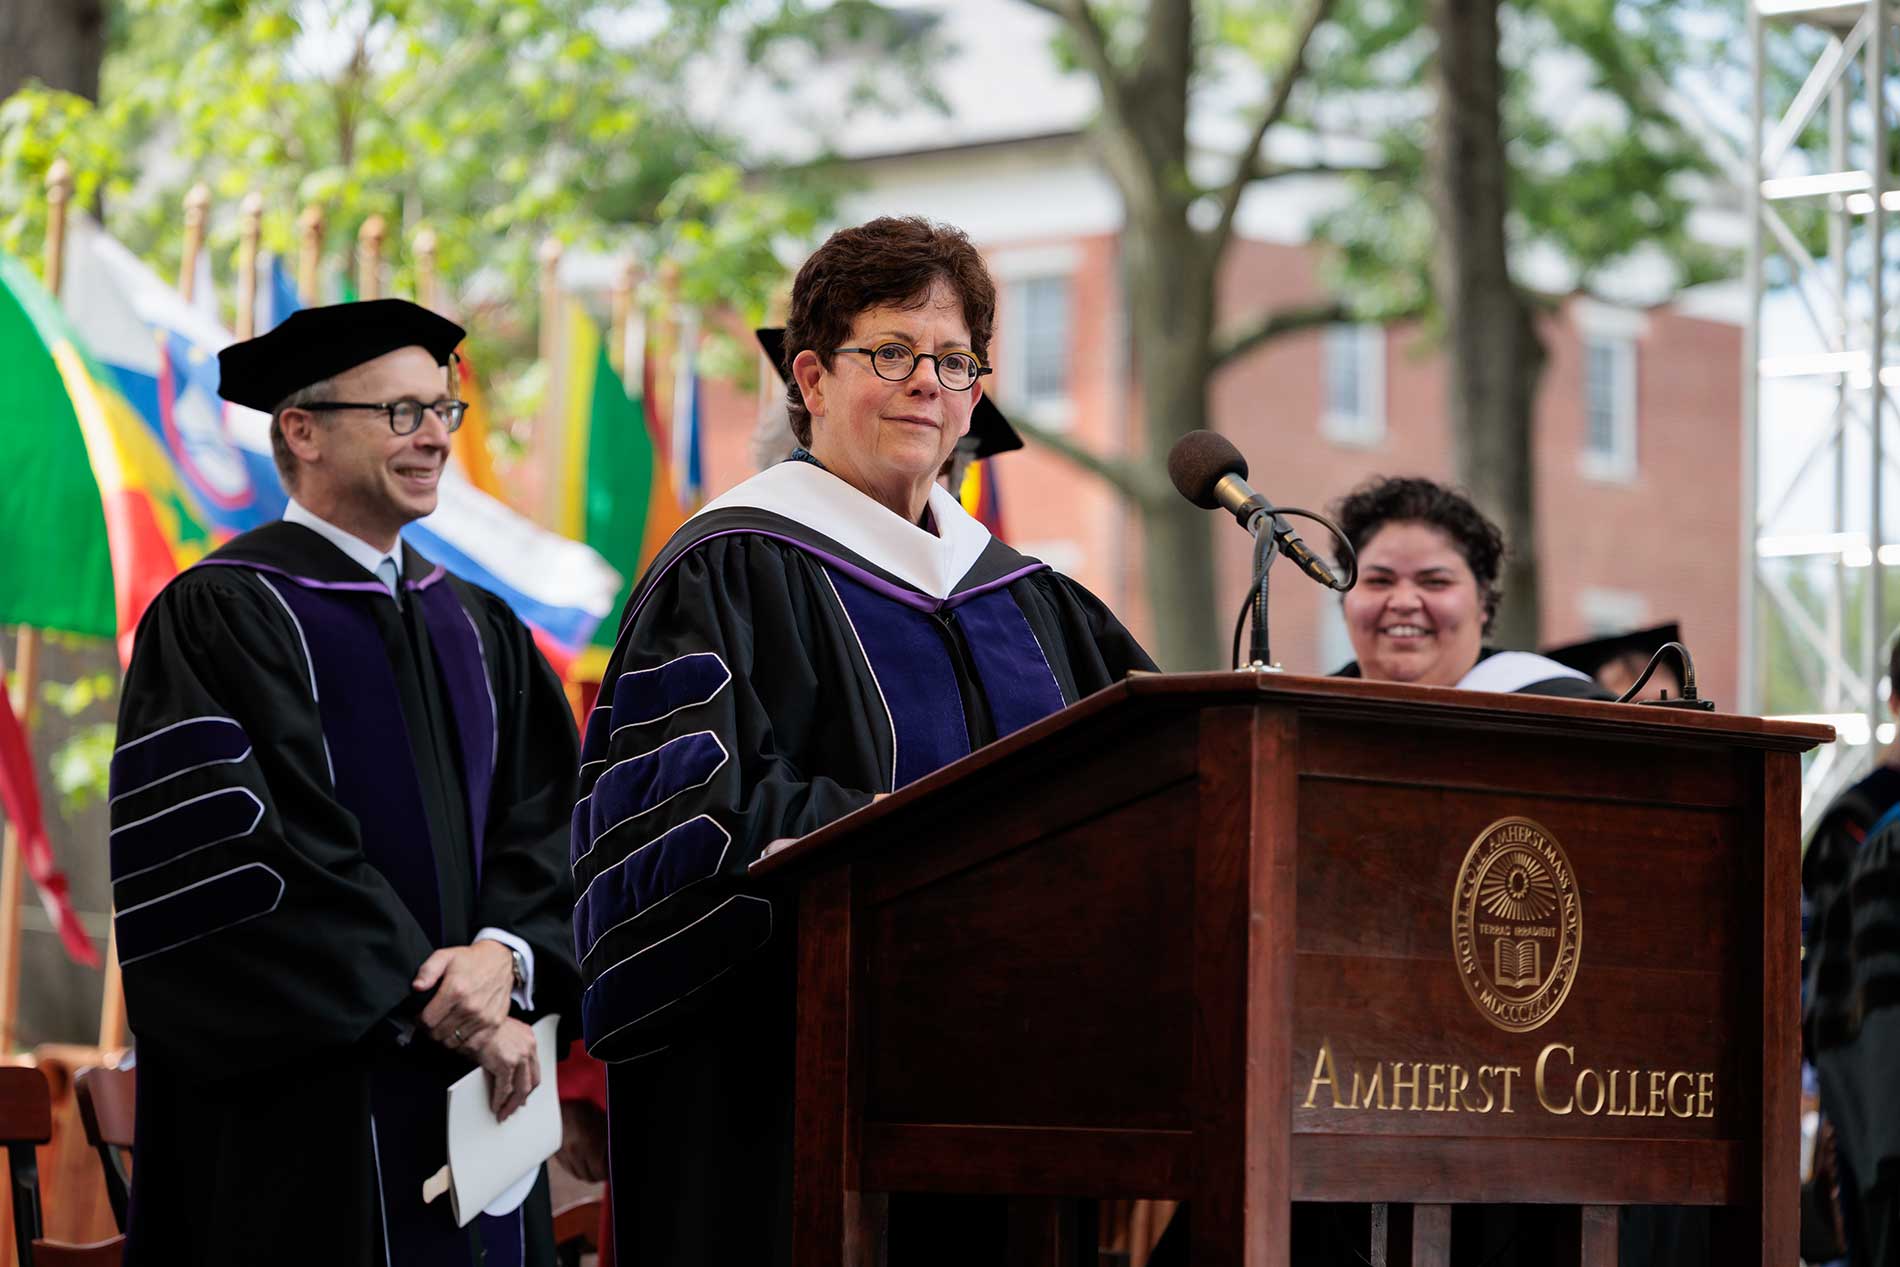 President Biddy Martin addresses the graduates at commencement.